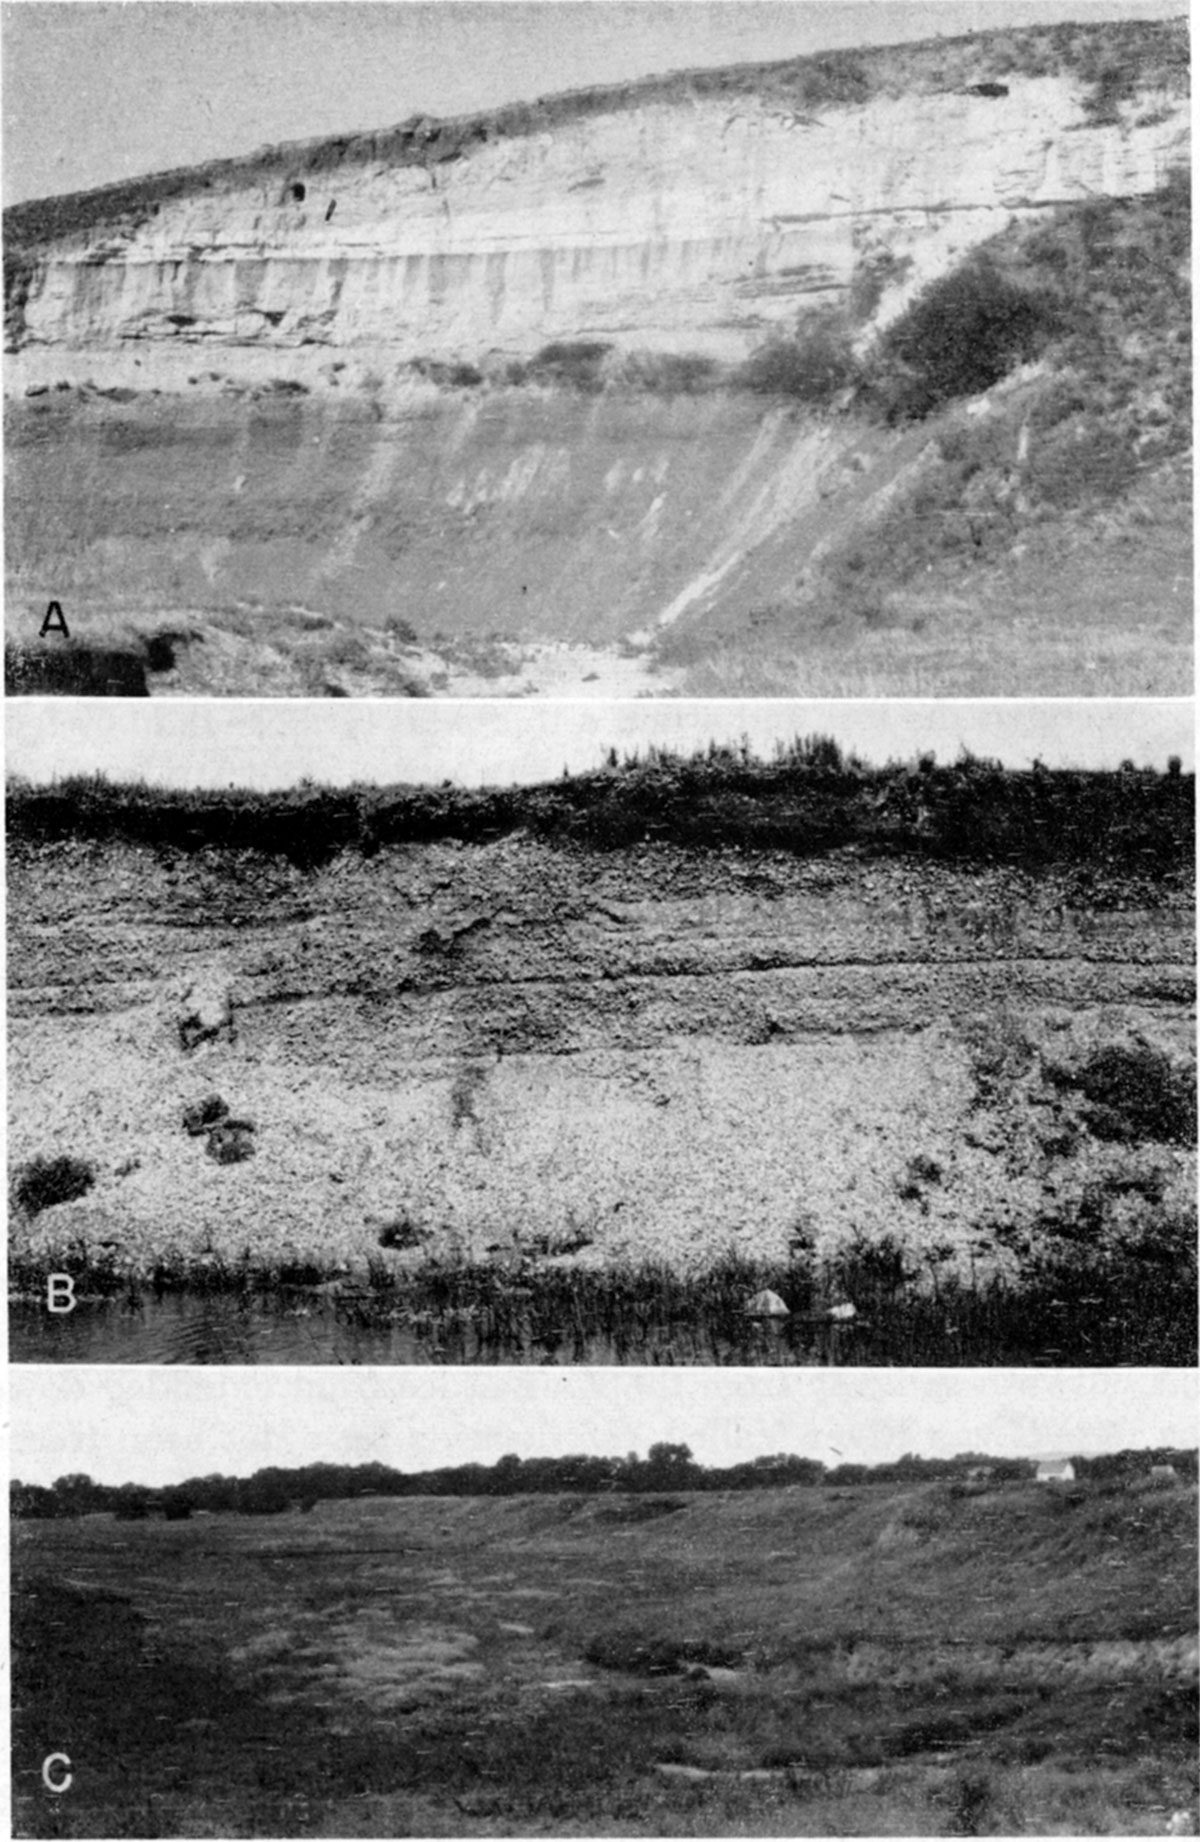 Three black and white photos; bright outcrop is part of grass-covered hill, bedding in uppper zones, lower part of hillside is less resistant and grayer; very gravely outcrop, 10-12 feet high, water at base; grass covered hills, not steeply sides, trees in background.